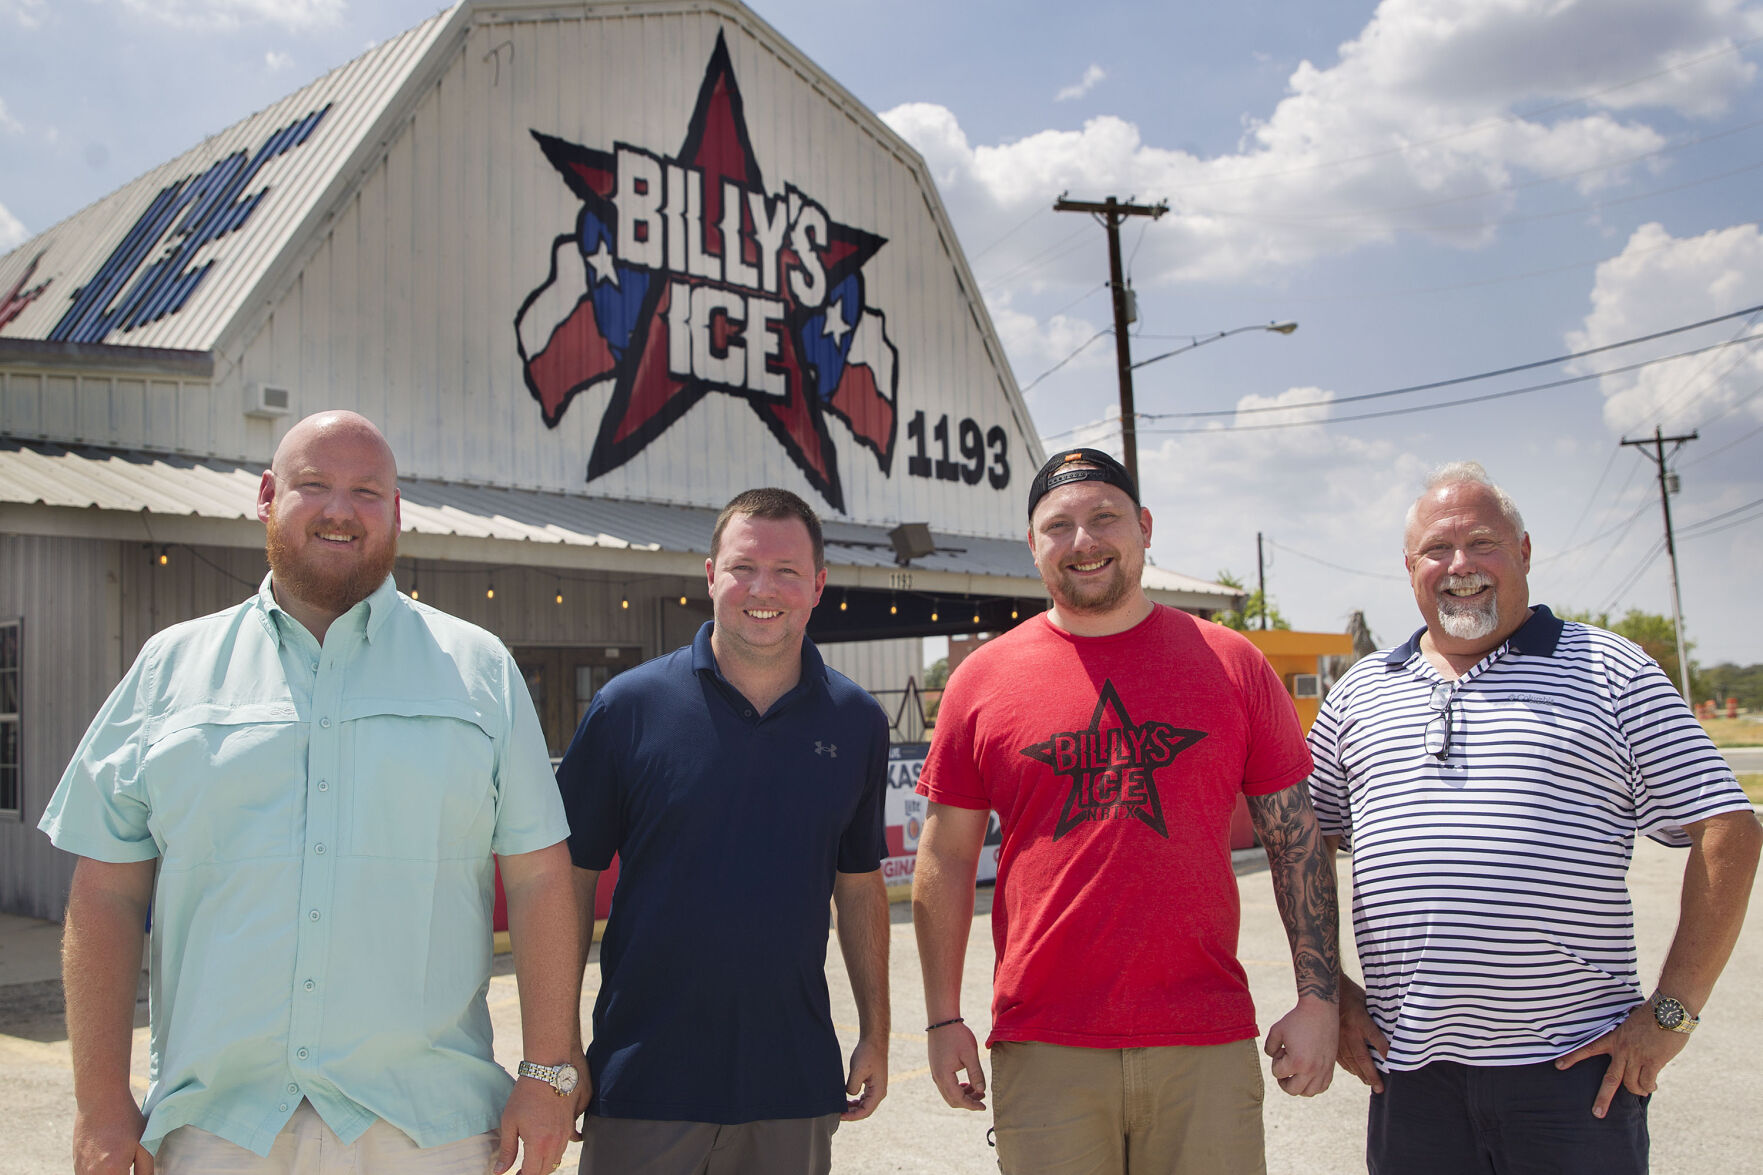 Billy's Ice in New Braunfels changes ownership, vows to keep